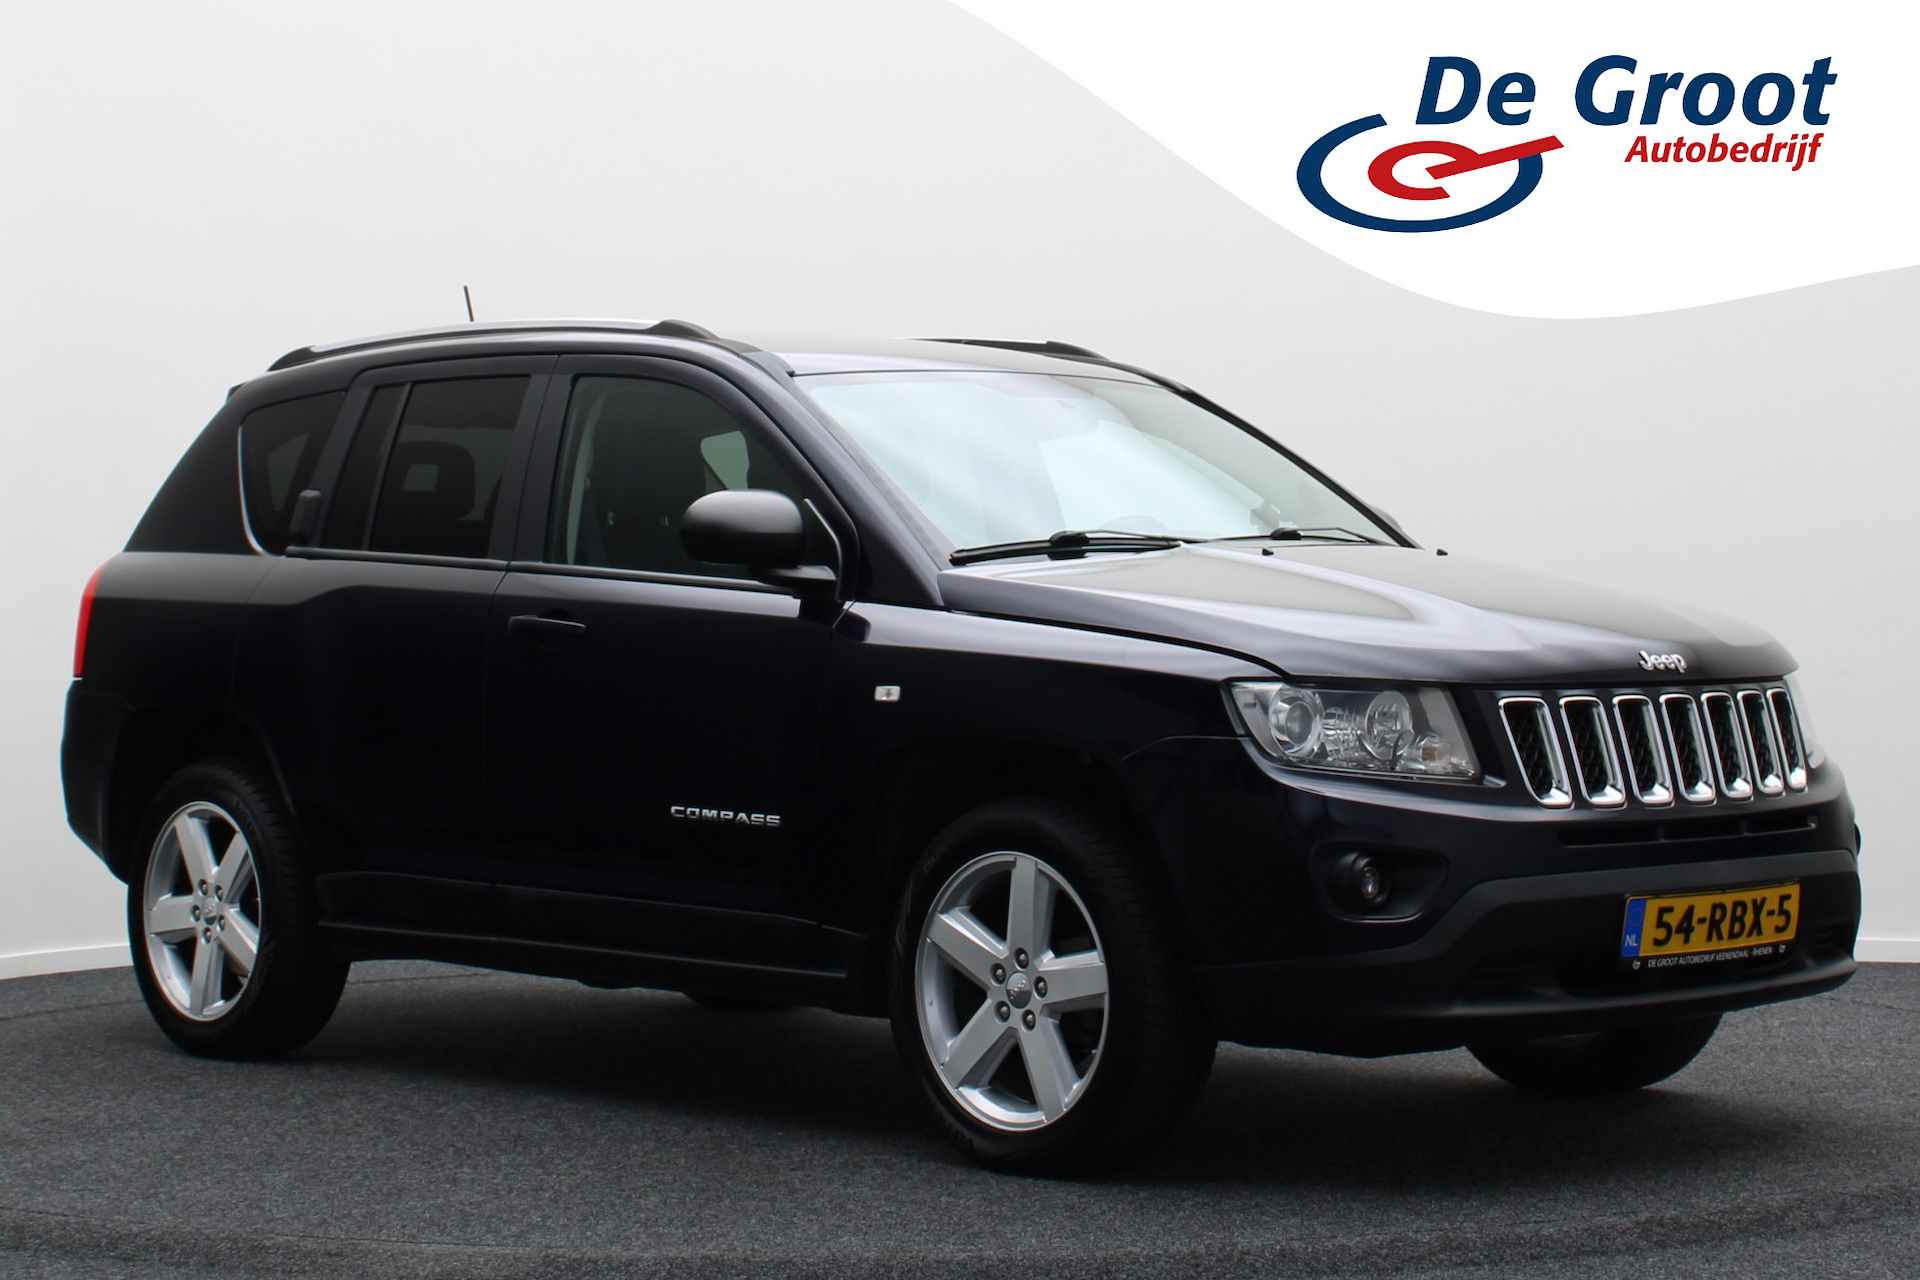 Jeep Compass 2.4 Limited 4WD Automaat Leer, Stoelverw., Climate, Cruise, Navigatie, Bluetooth, 18'' - 1/36